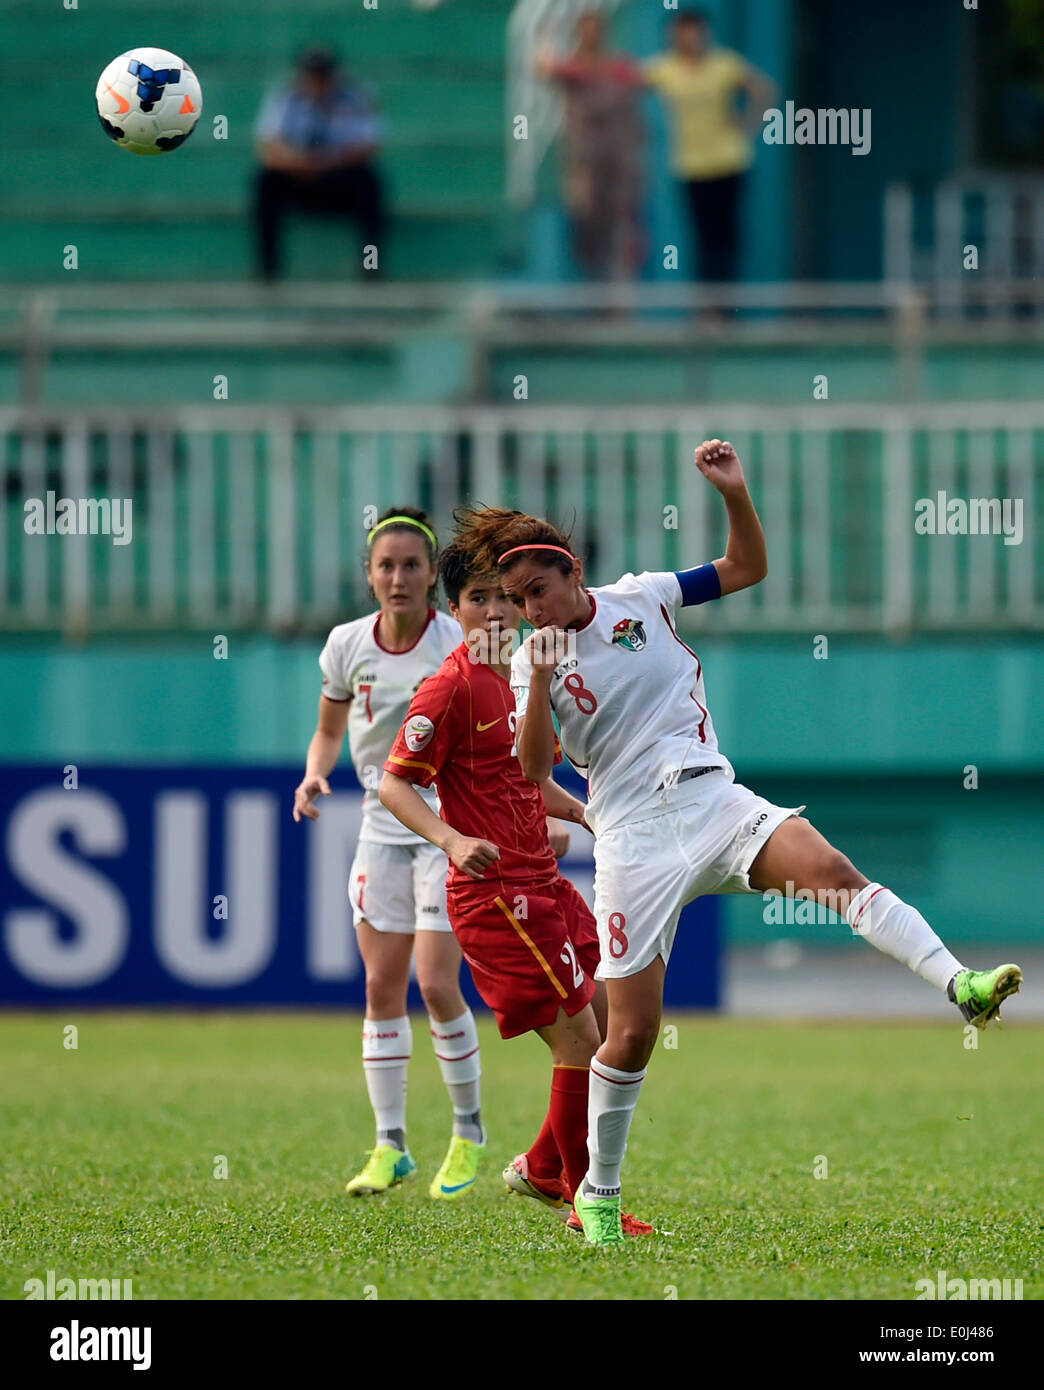 Ho Chi Minh City, Vietnam. 14th May, 2014. Jordan's Stephanie Mazen Yousef Alnaber (R) vies for the ball during the Group A match against Vietnam at the 2014 AFC Women's Asian Cup held at Thong Nhat Stadium in Ho Chi Minh city, Vietnam, May 14, 2014. Vietnam beat Jordan 3-1. © He Jingjia/Xinhua/Alamy Live News Stock Photo